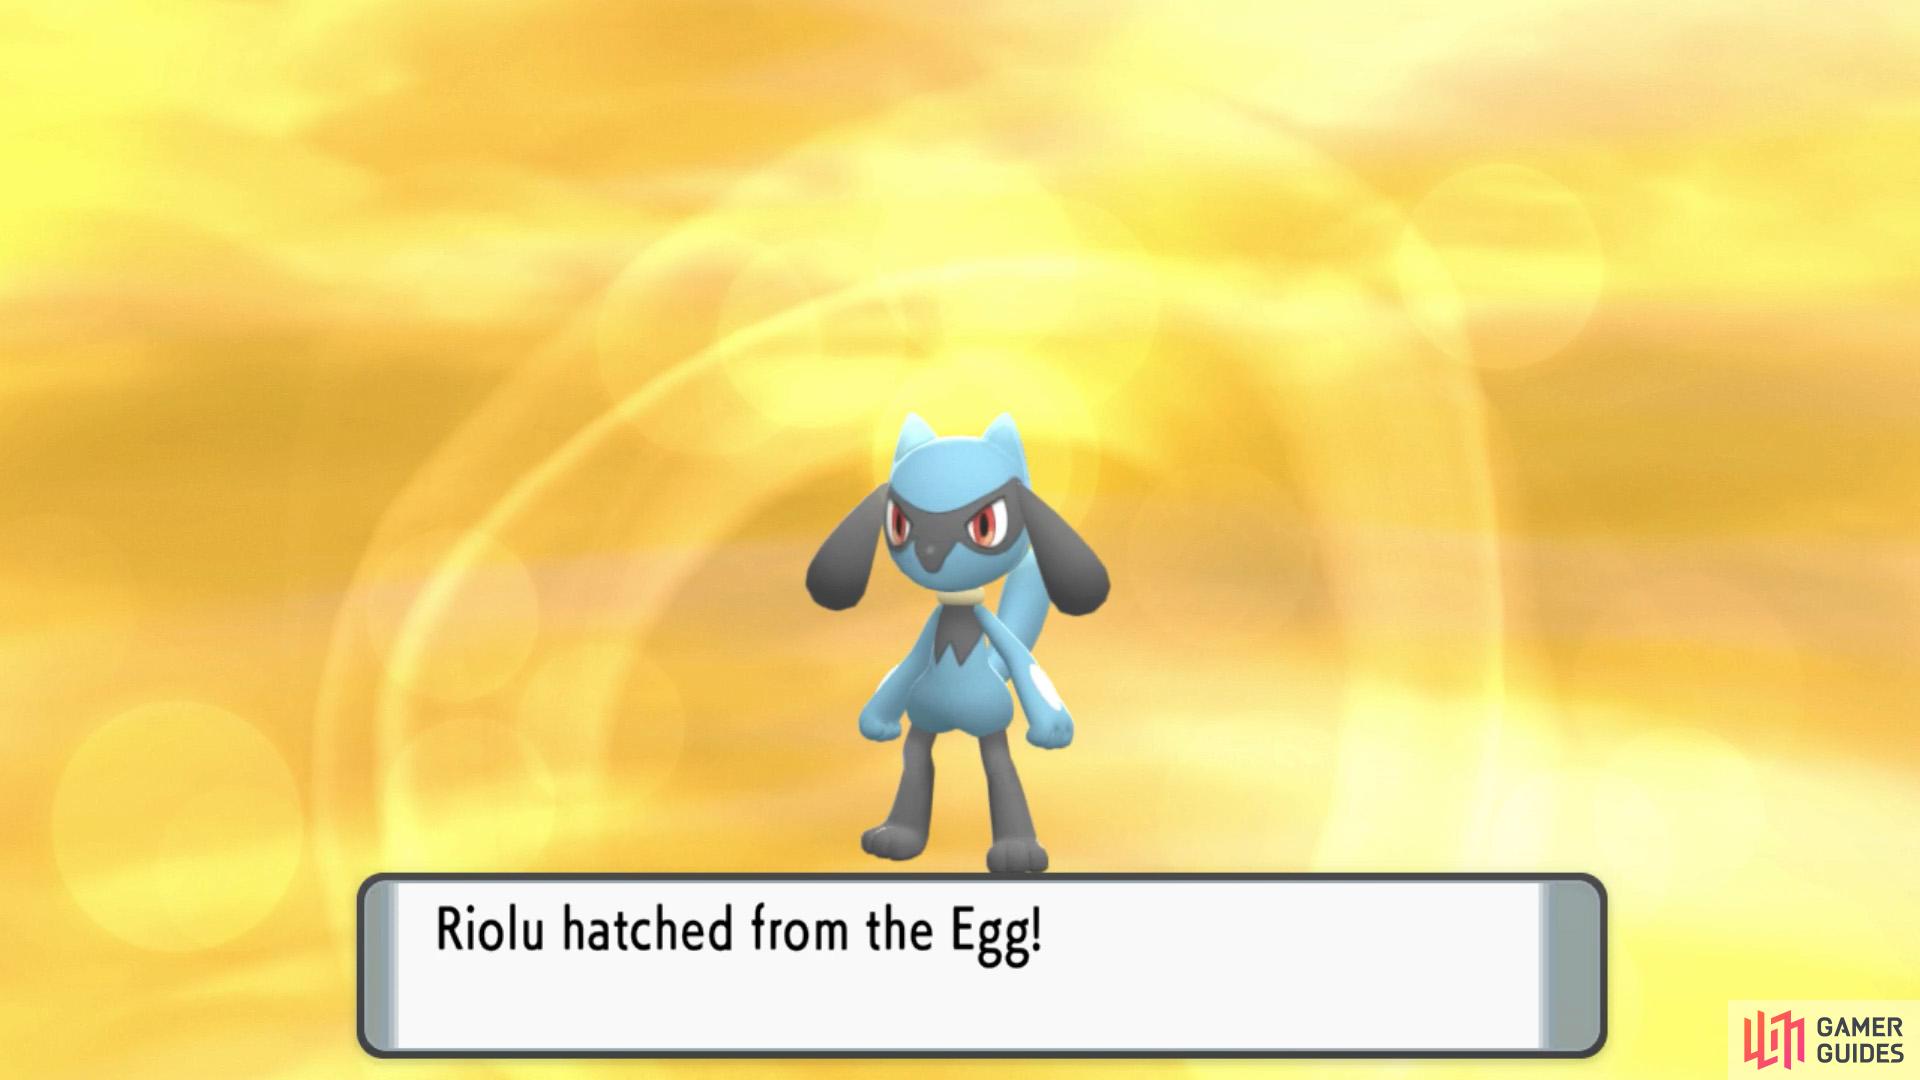 Keep the egg in your party and it'll hatch into a Riolu.